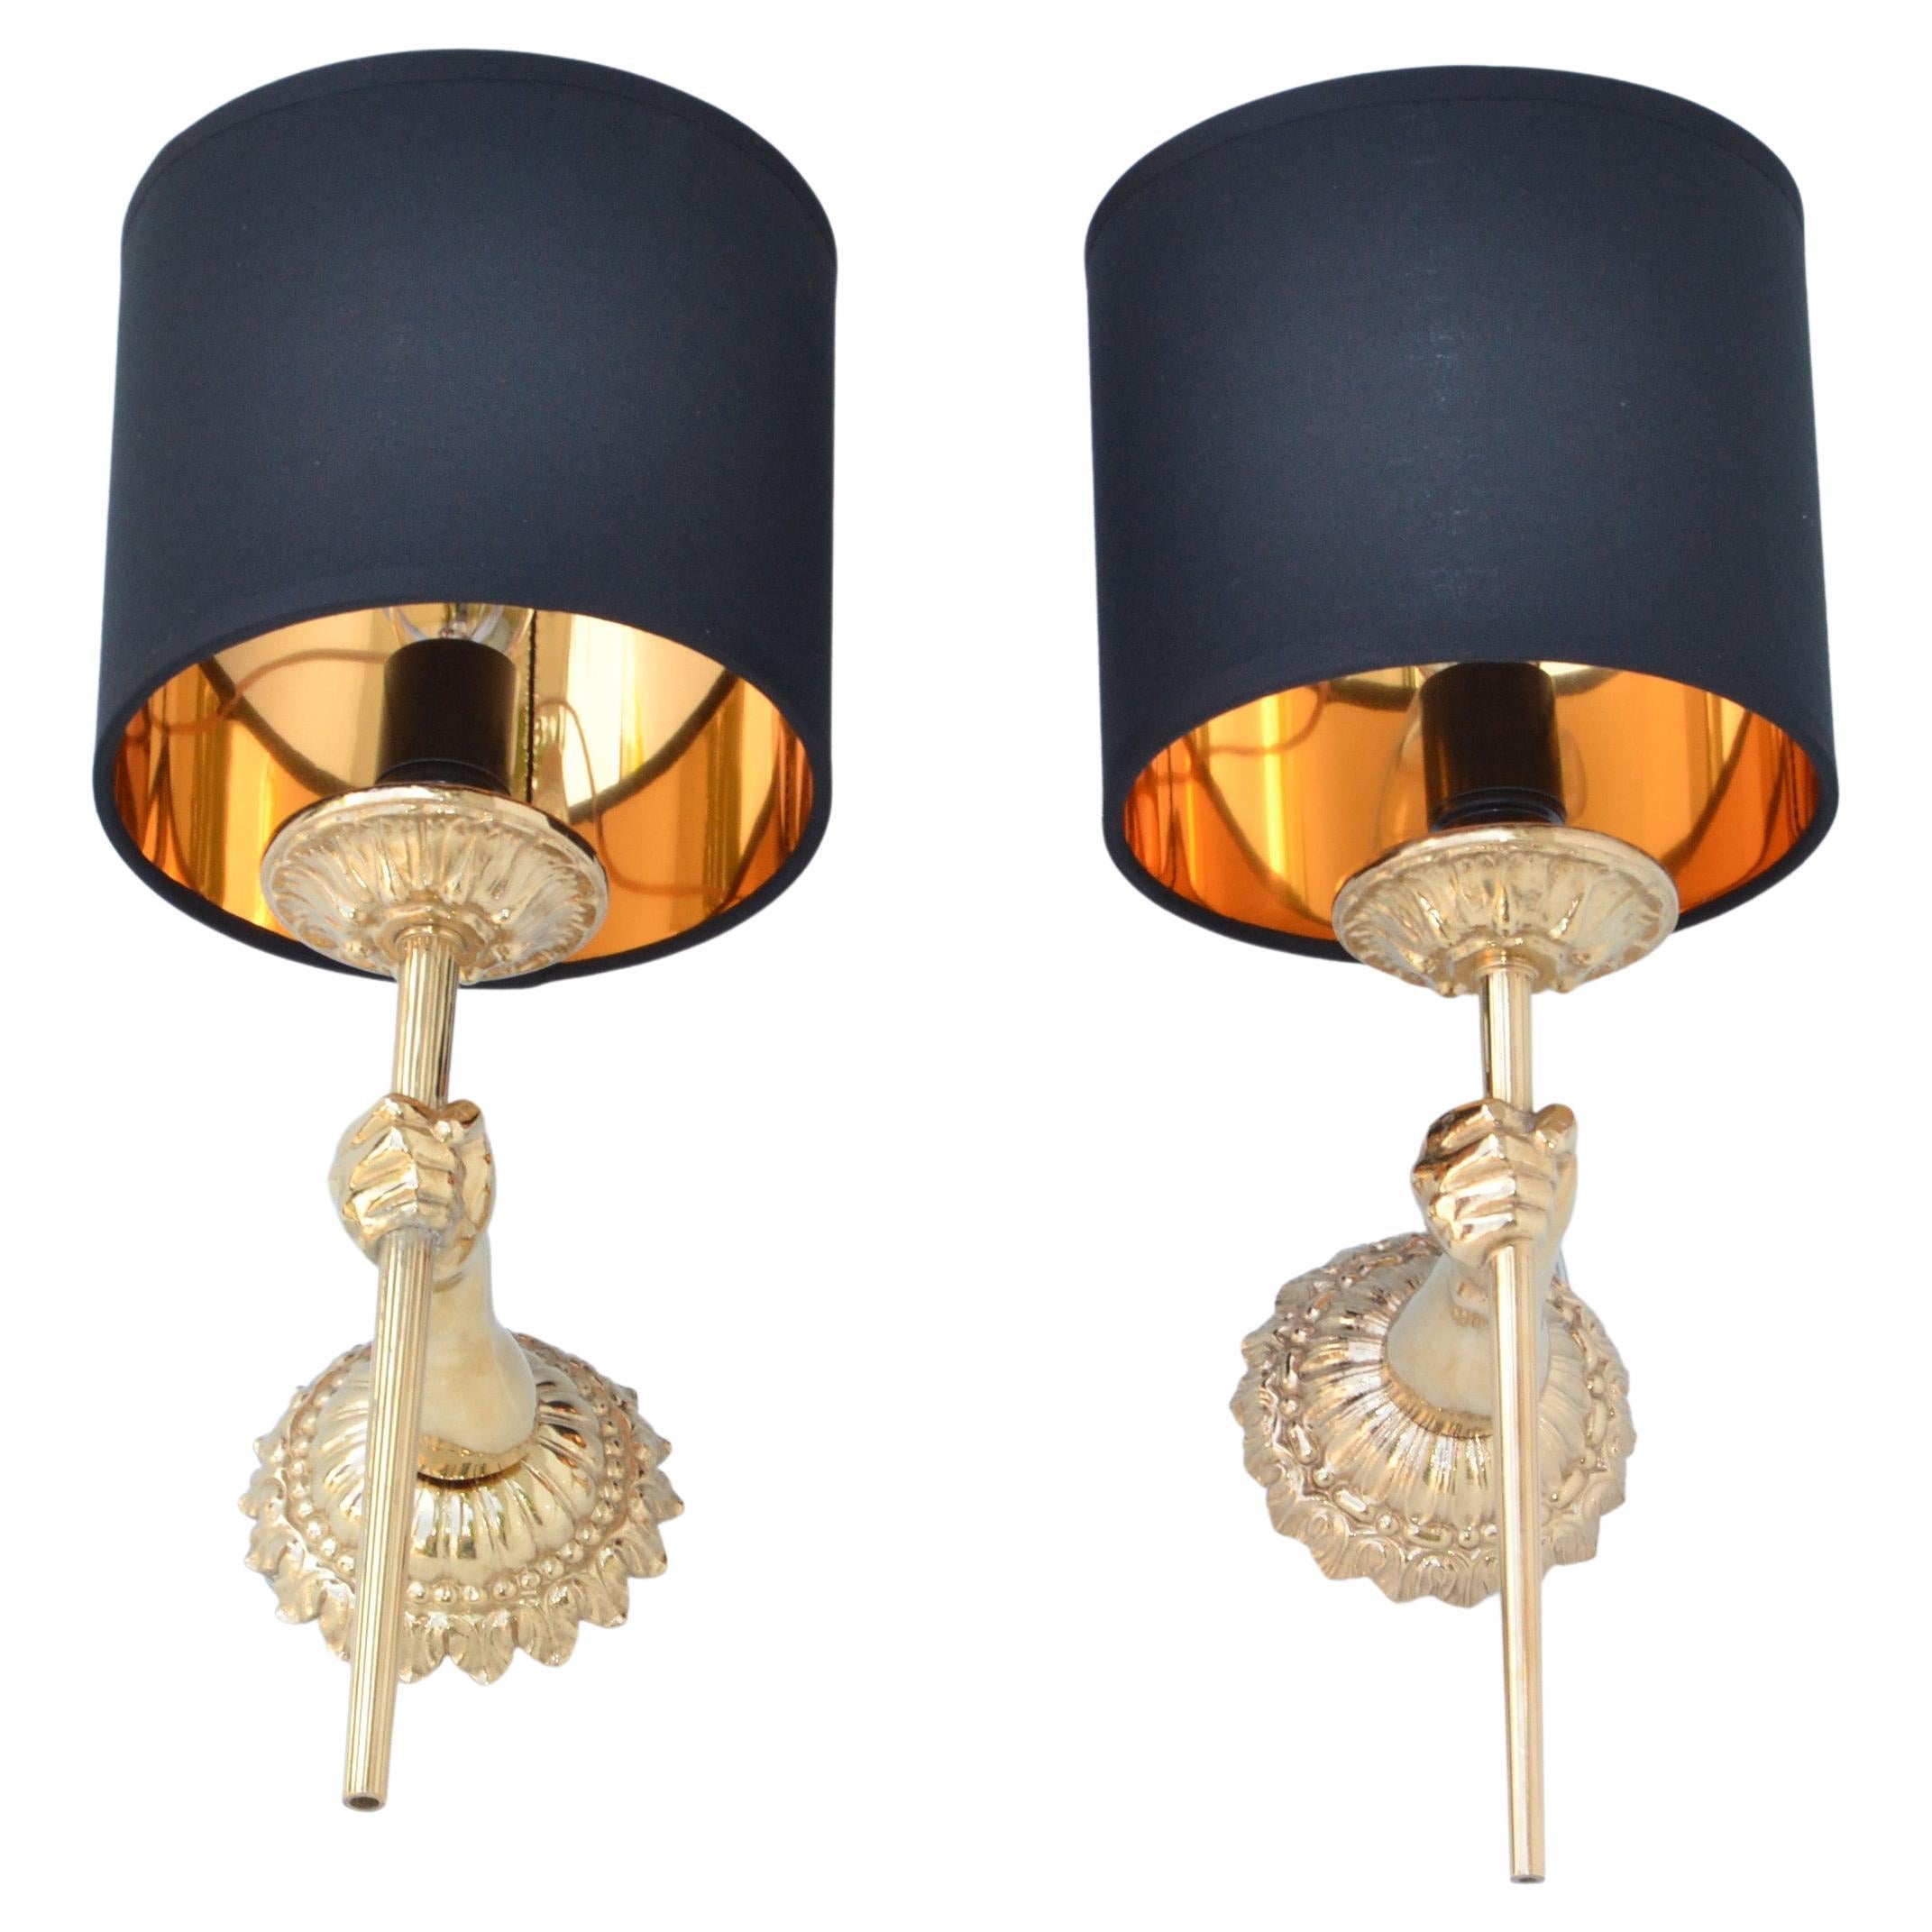 Pair of Maison Lancel Sconces Gold Plated Hand Sconces Torch & Shade France 1960